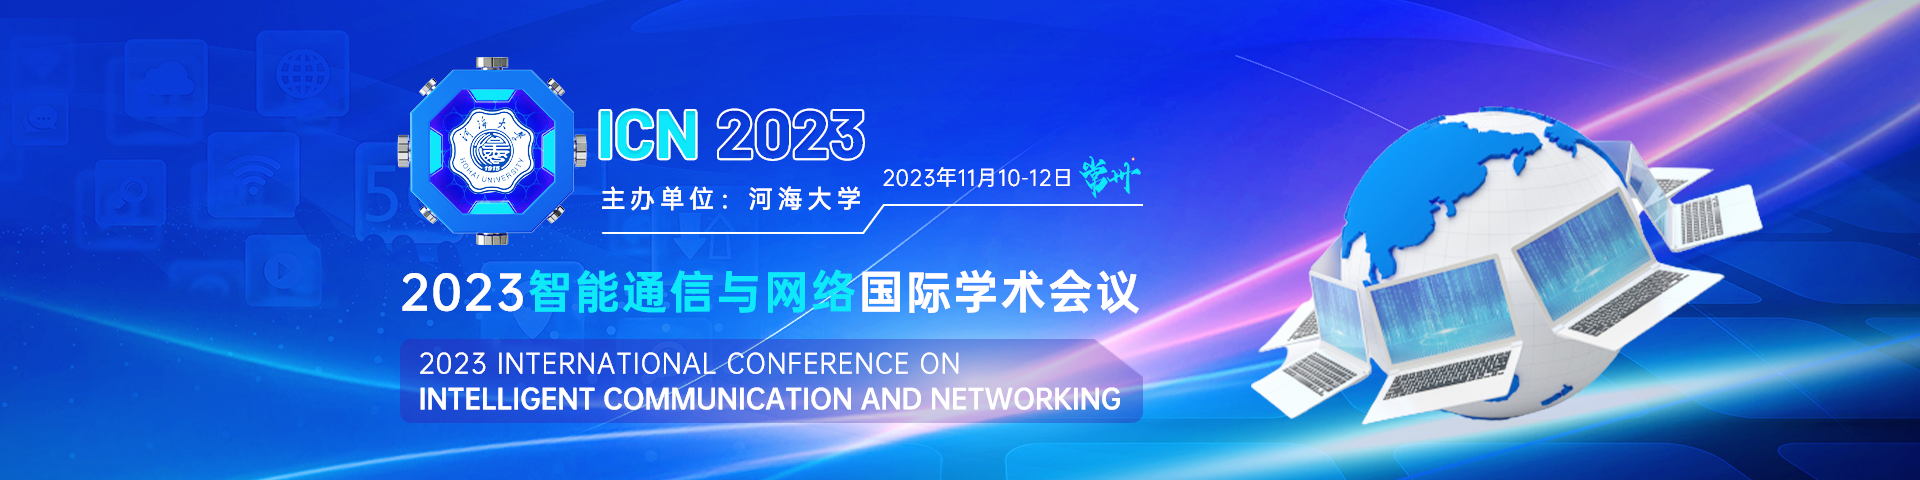 November Changzhou ICN2023-Conference AIS banner-20230526.png